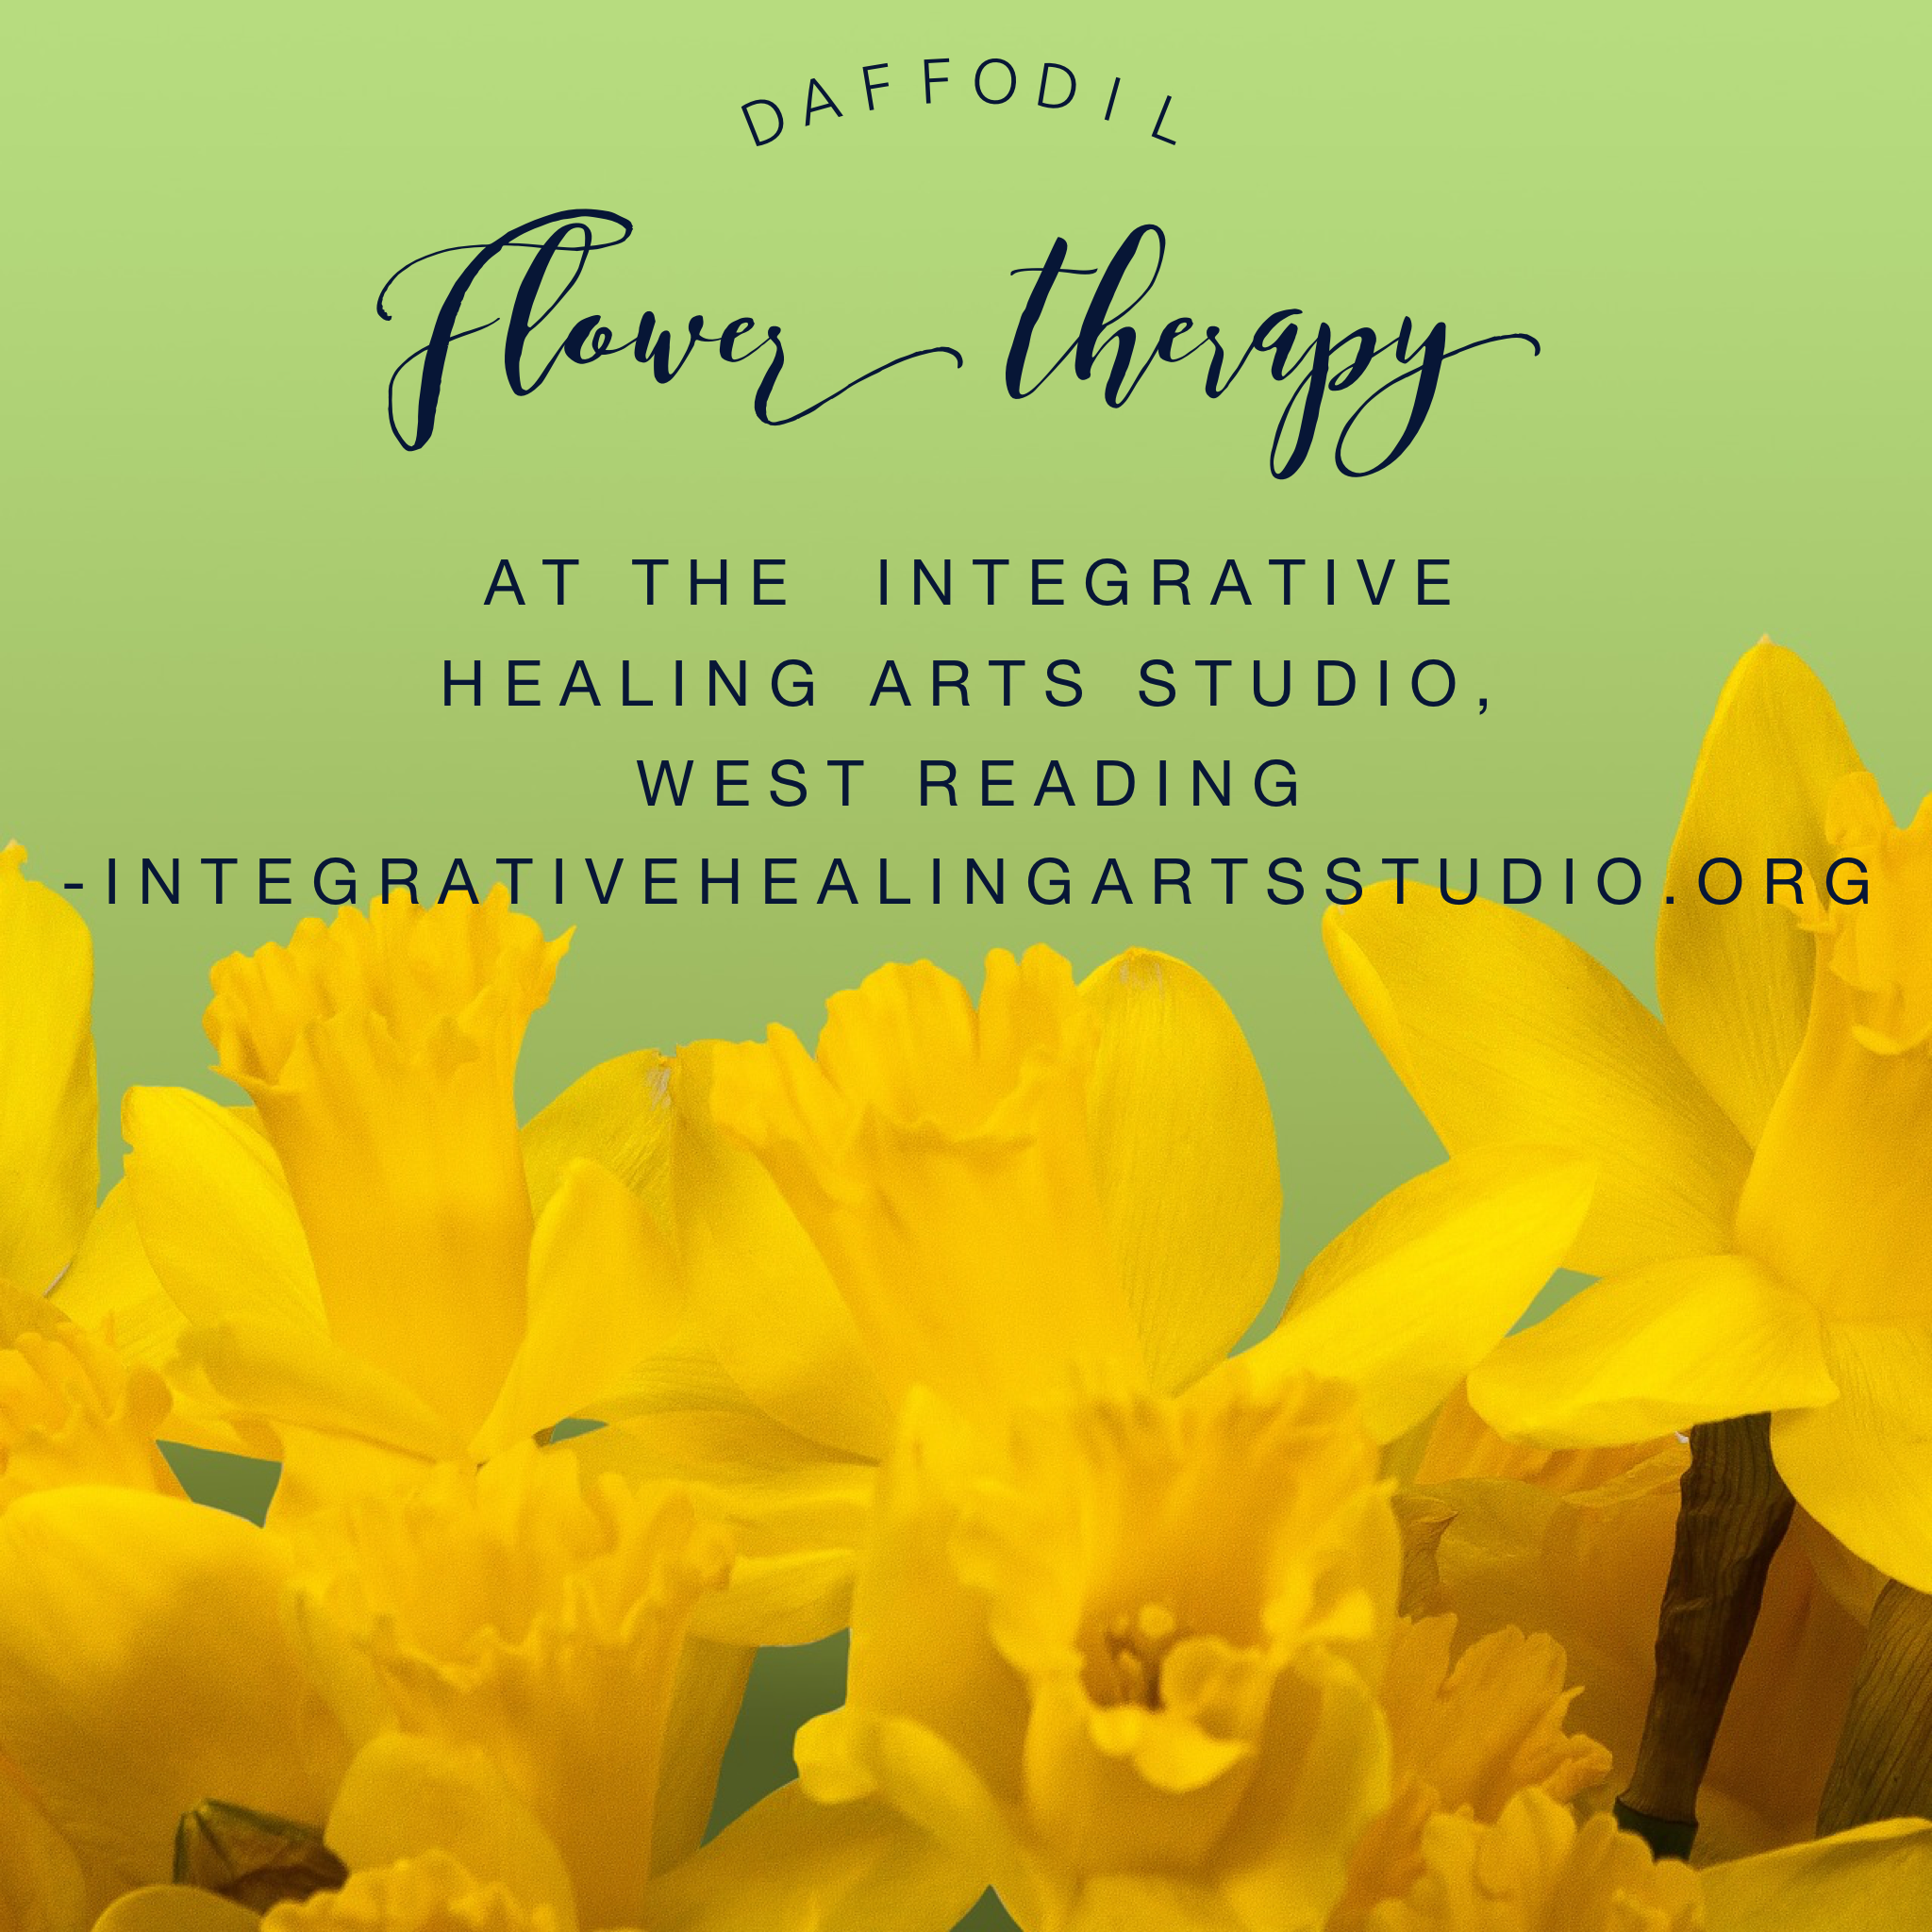 Flower Therapy Daffodil Integrative Healing Arts Studio, West Reading